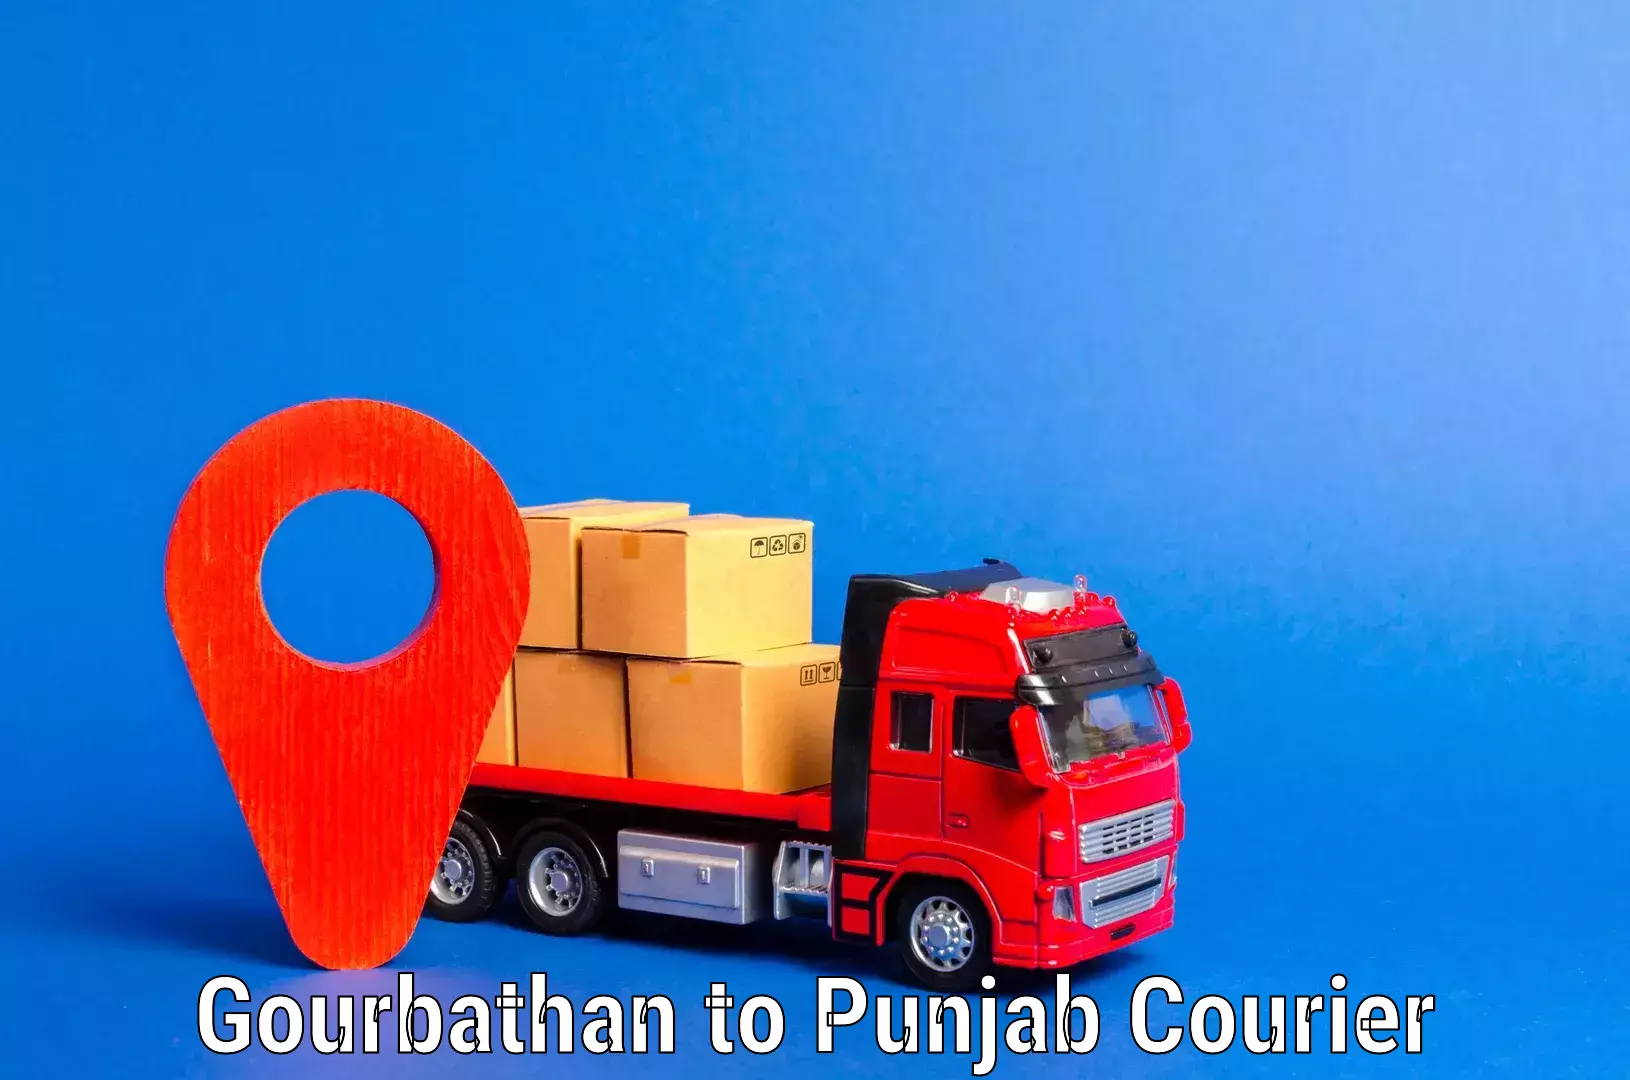 Furniture moving specialists Gourbathan to Punjab